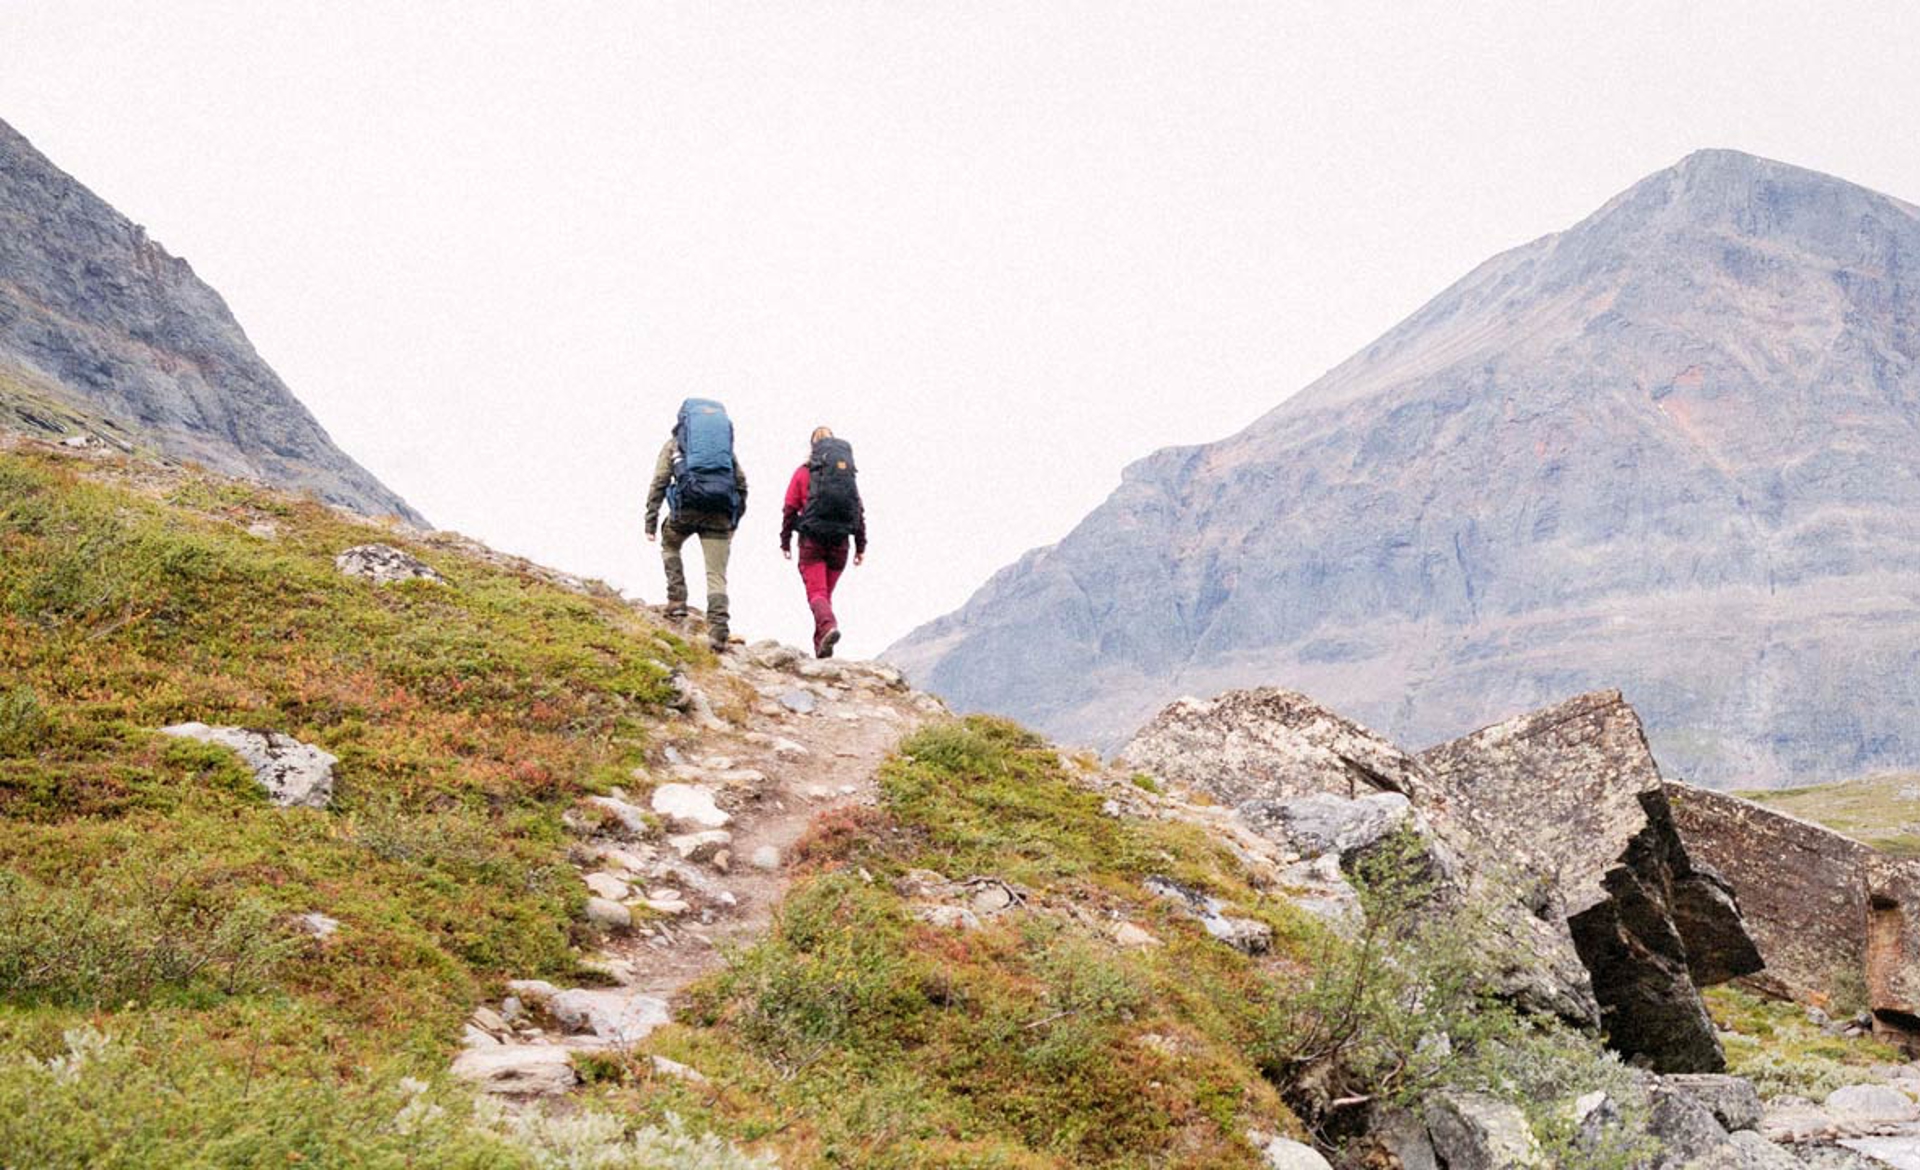 two people trekking on the side of a mountain in Fjallraven apparel and packs